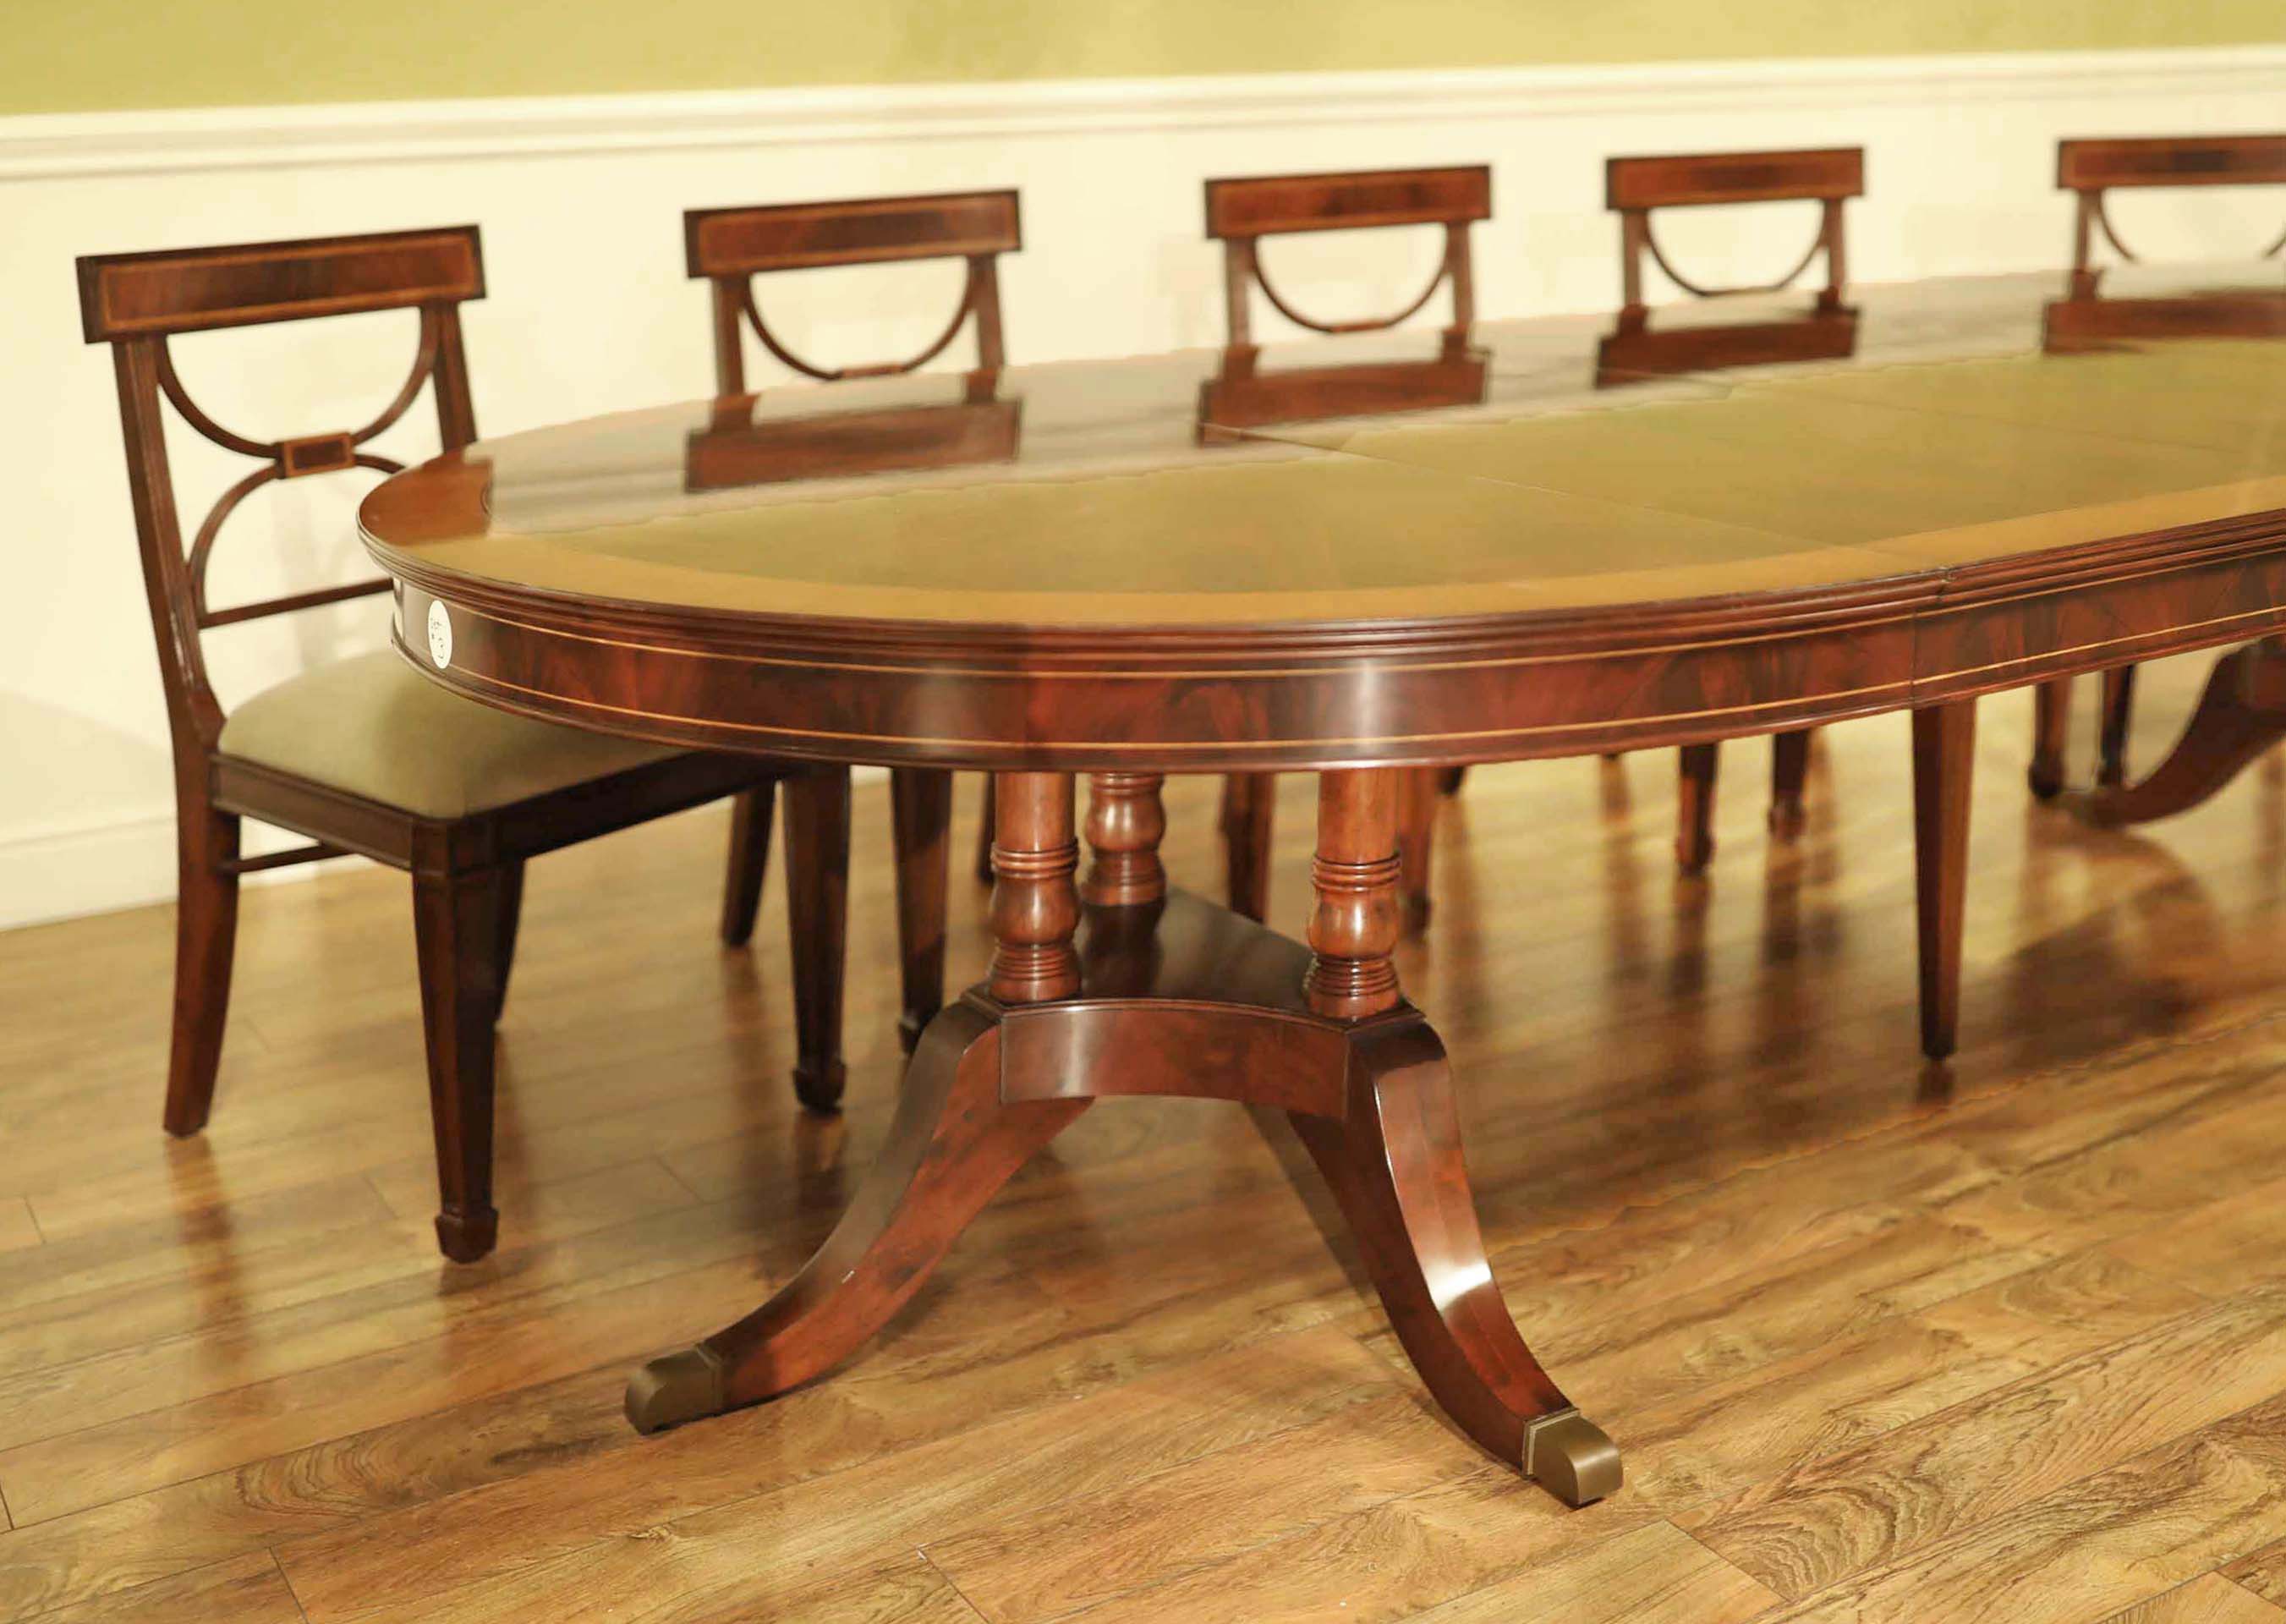 Antique Dining Table And Chairs For Sale Near Me